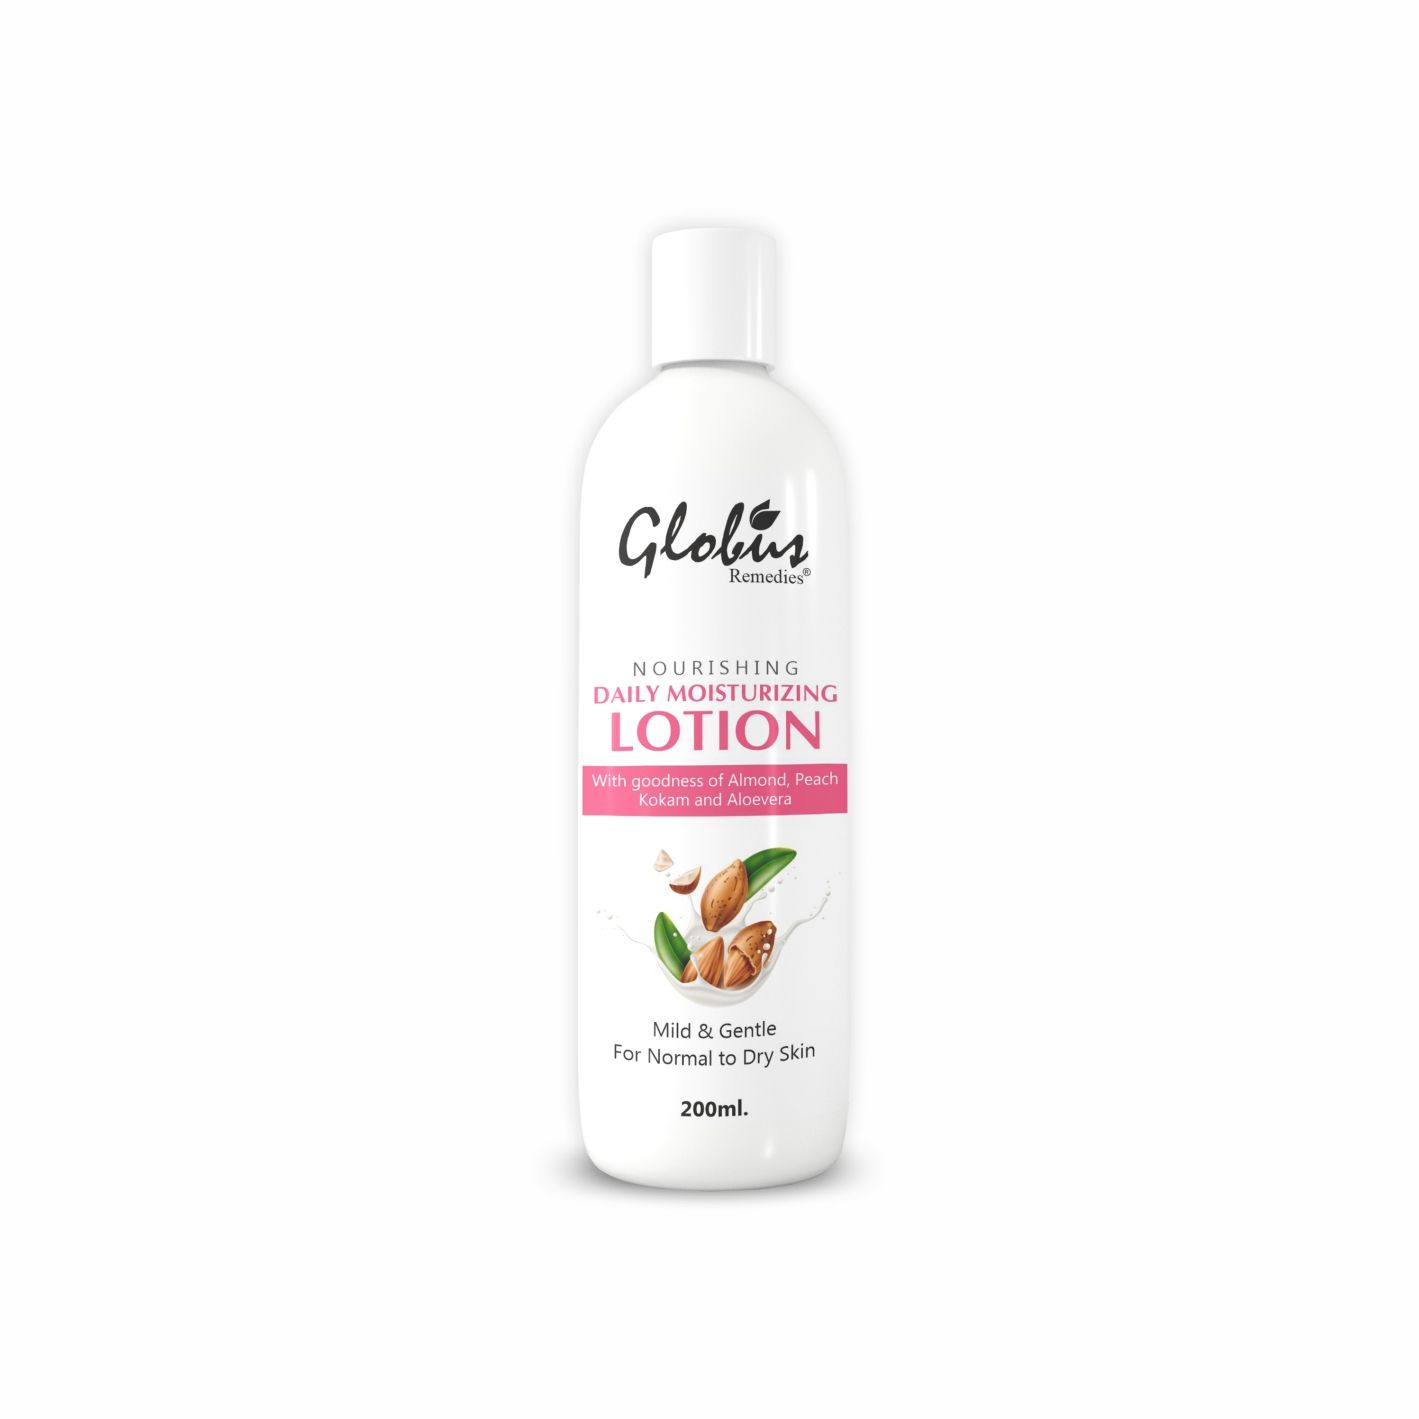 Buy Globus Remedies Nourishing & Daily Moisturizing Body Lotion, For Silky Smooth Skin, With Goodness of Almond, Aloe Vera & Peach & Kokum Butter, 200ml - Purplle